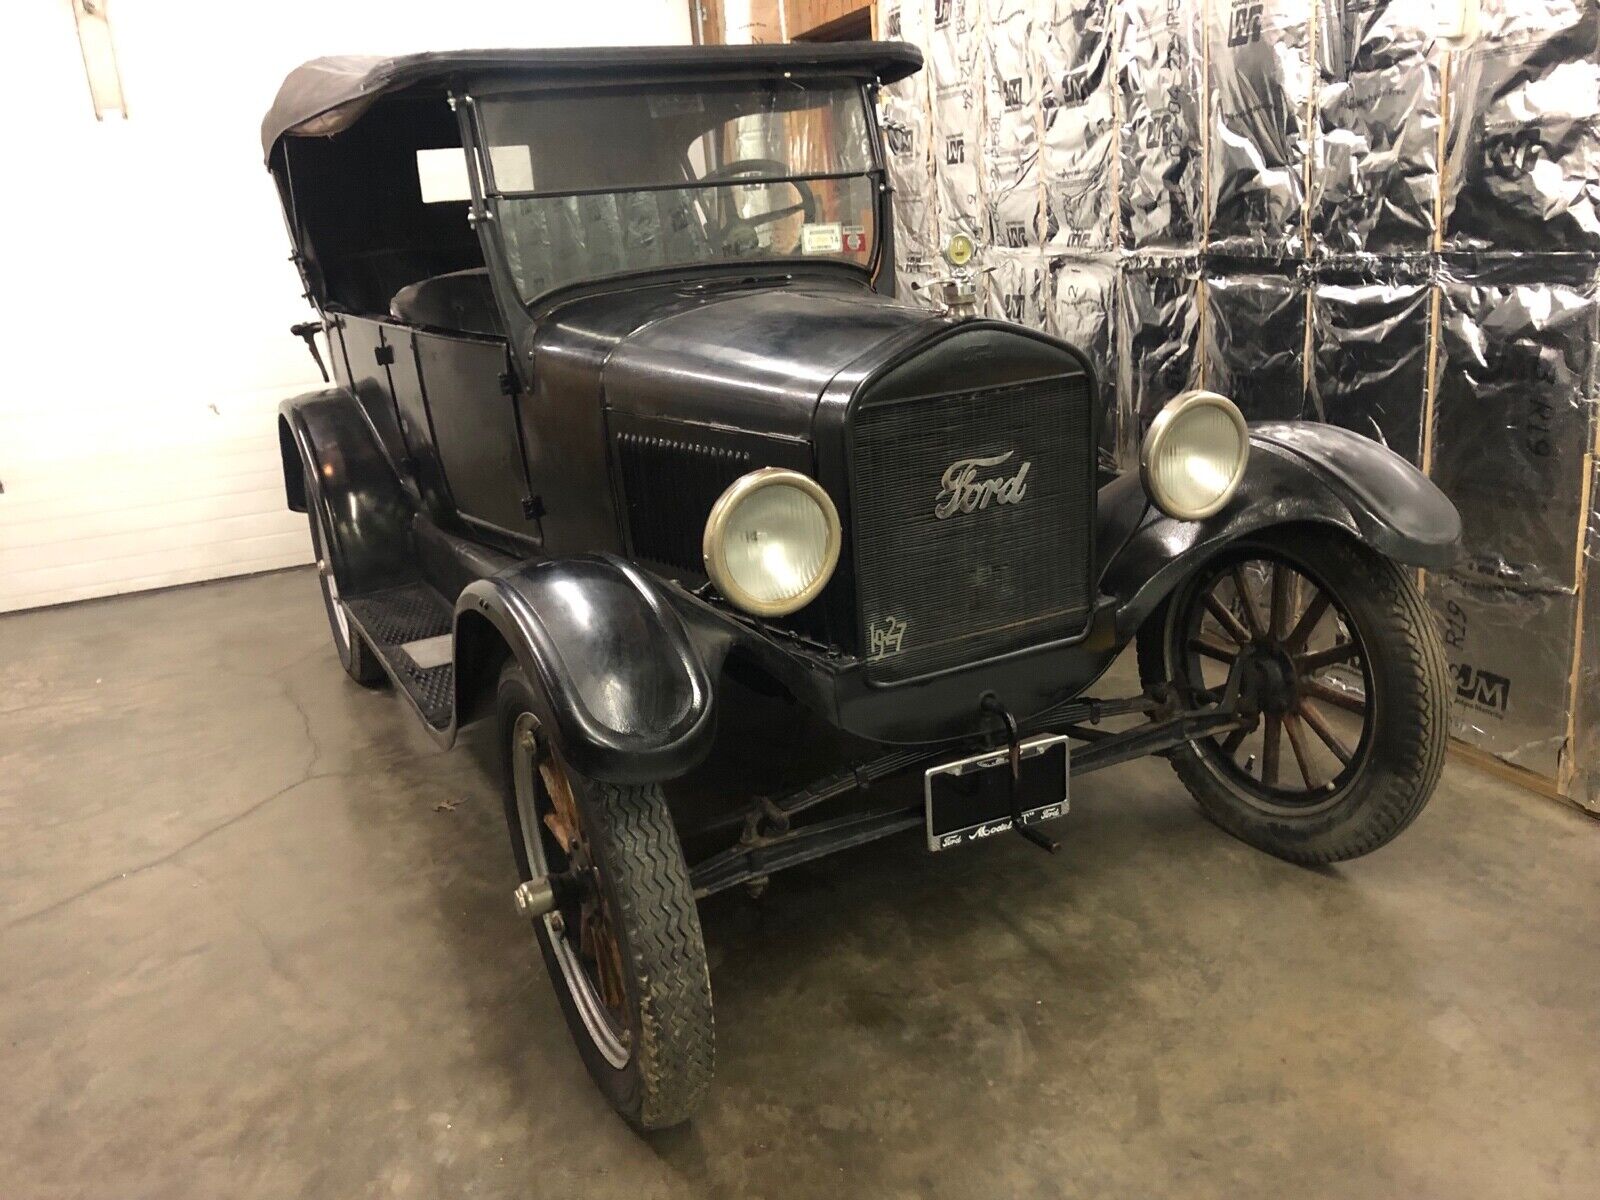 1927 Ford Model T touring